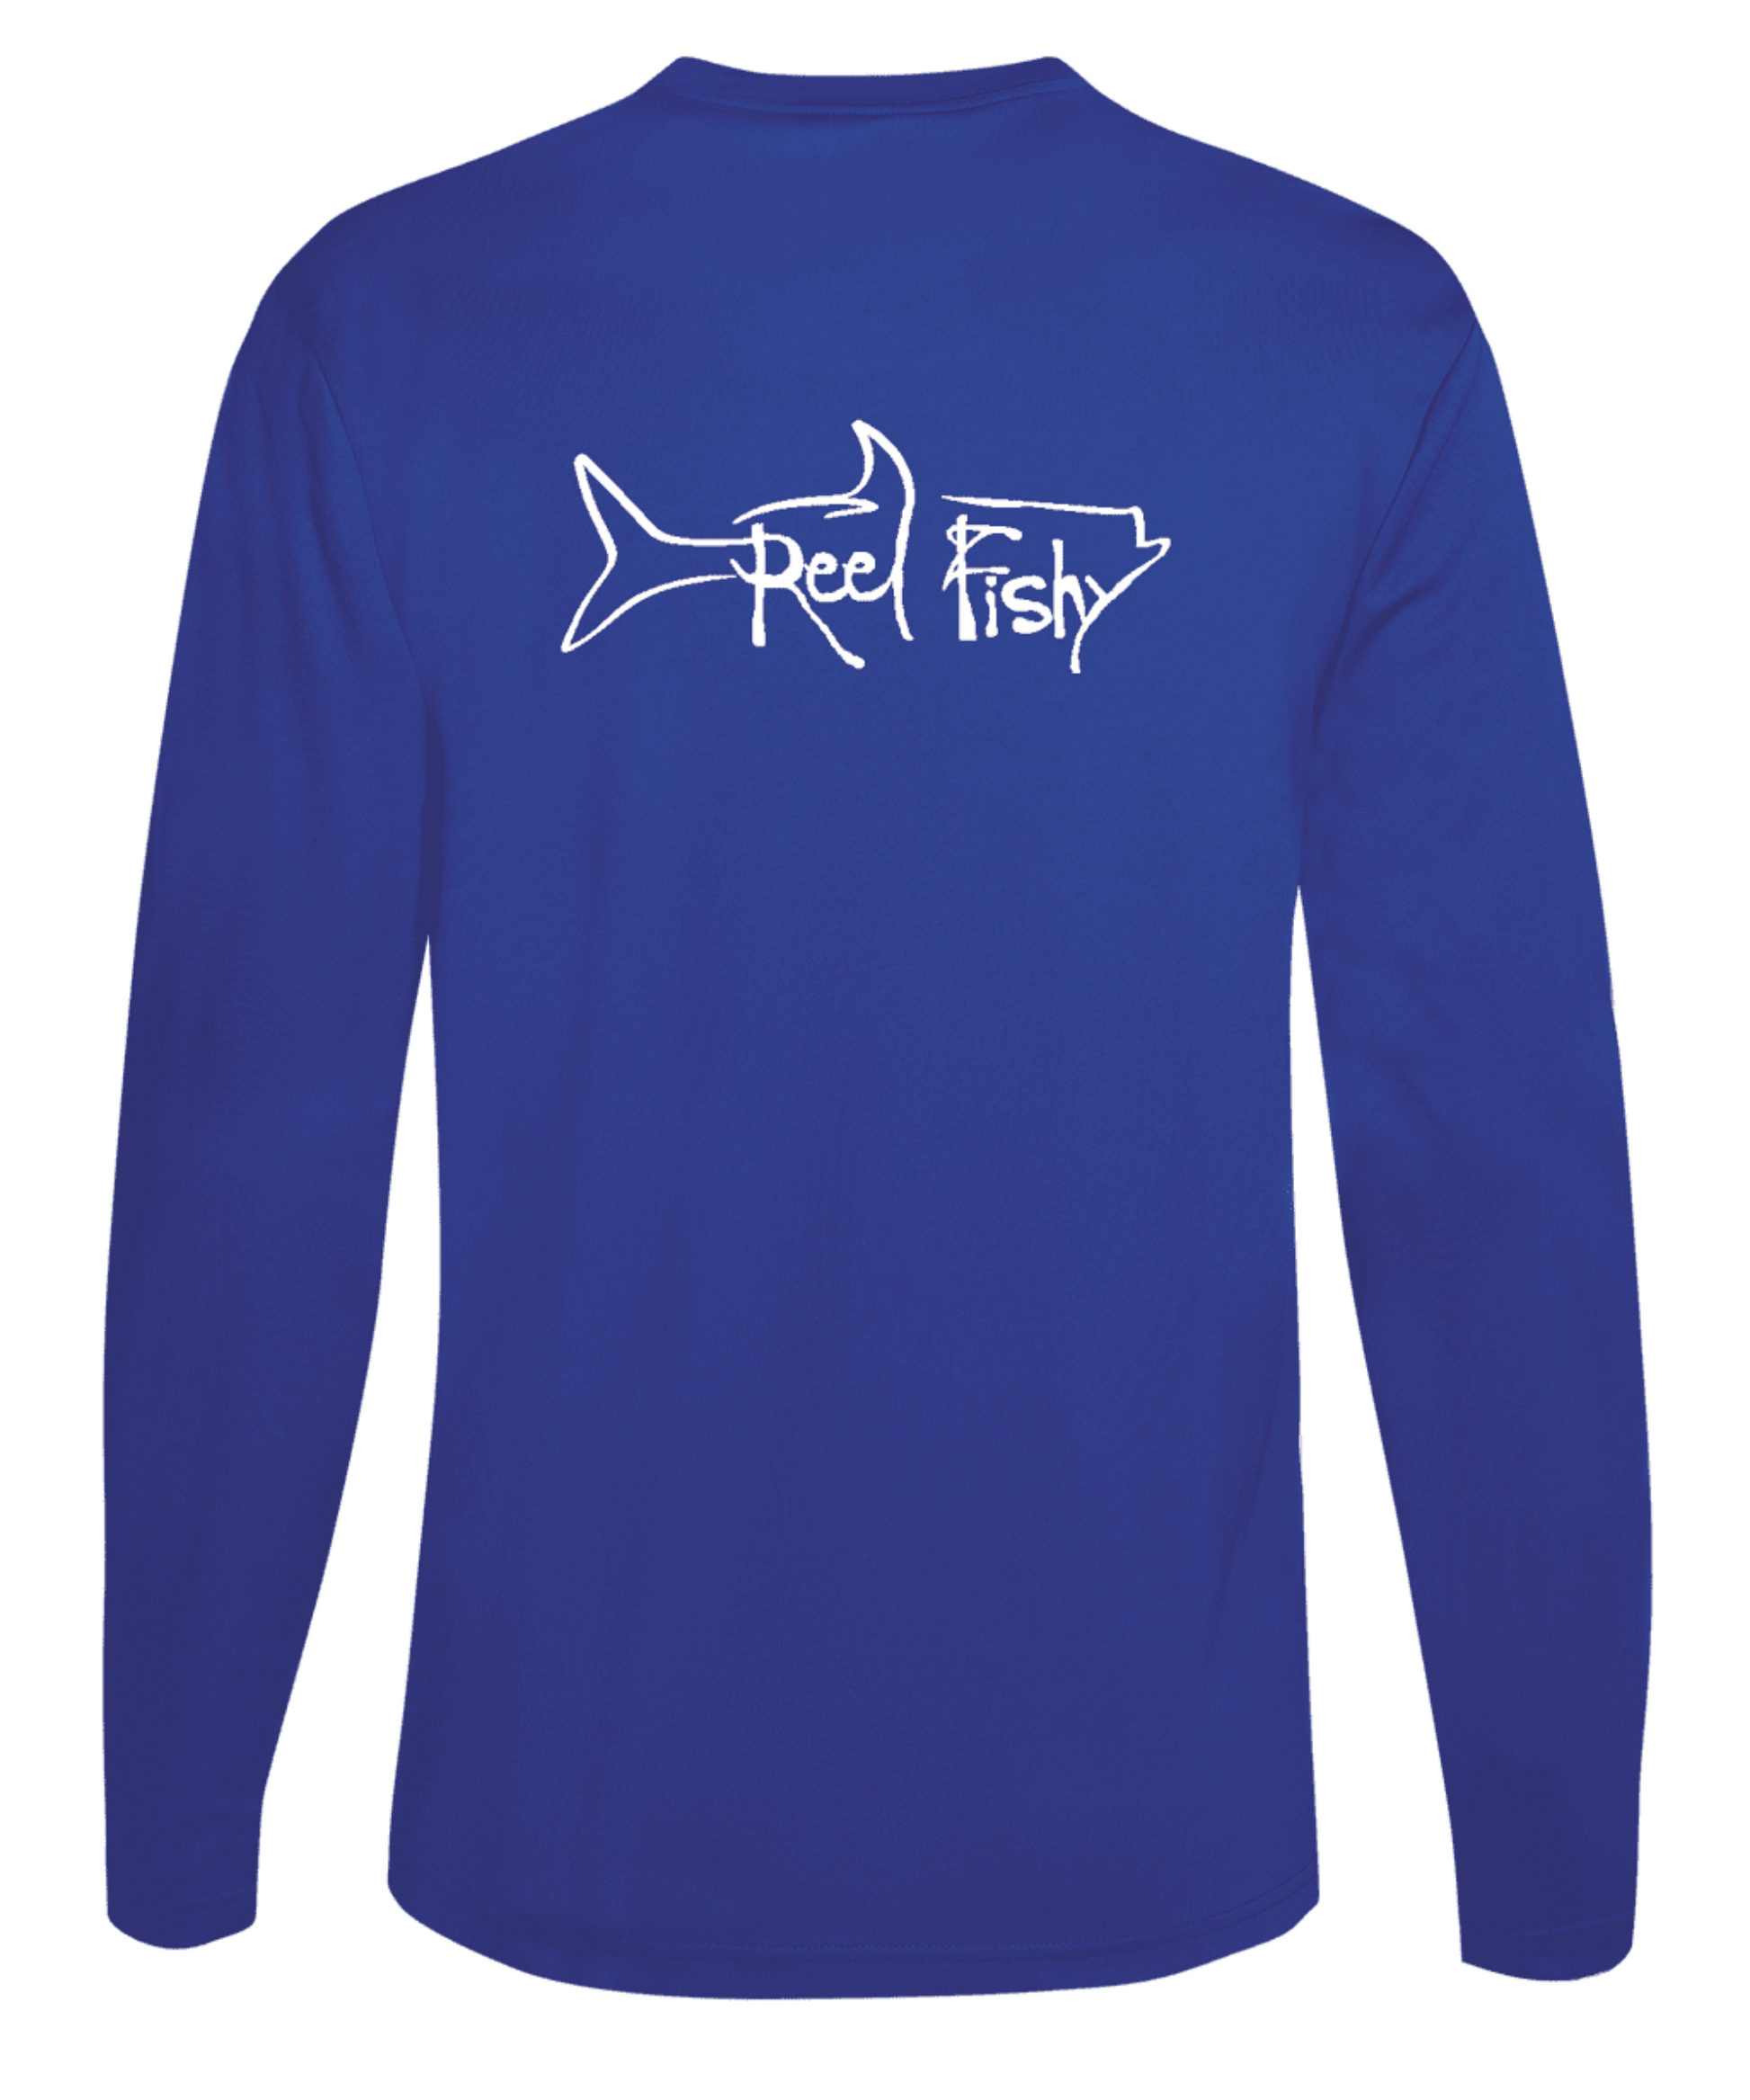 Performance Dry-Fit Tarpon Fishing long sleeve shirts with Sun Protection by Reel Fishy in Royal Blue